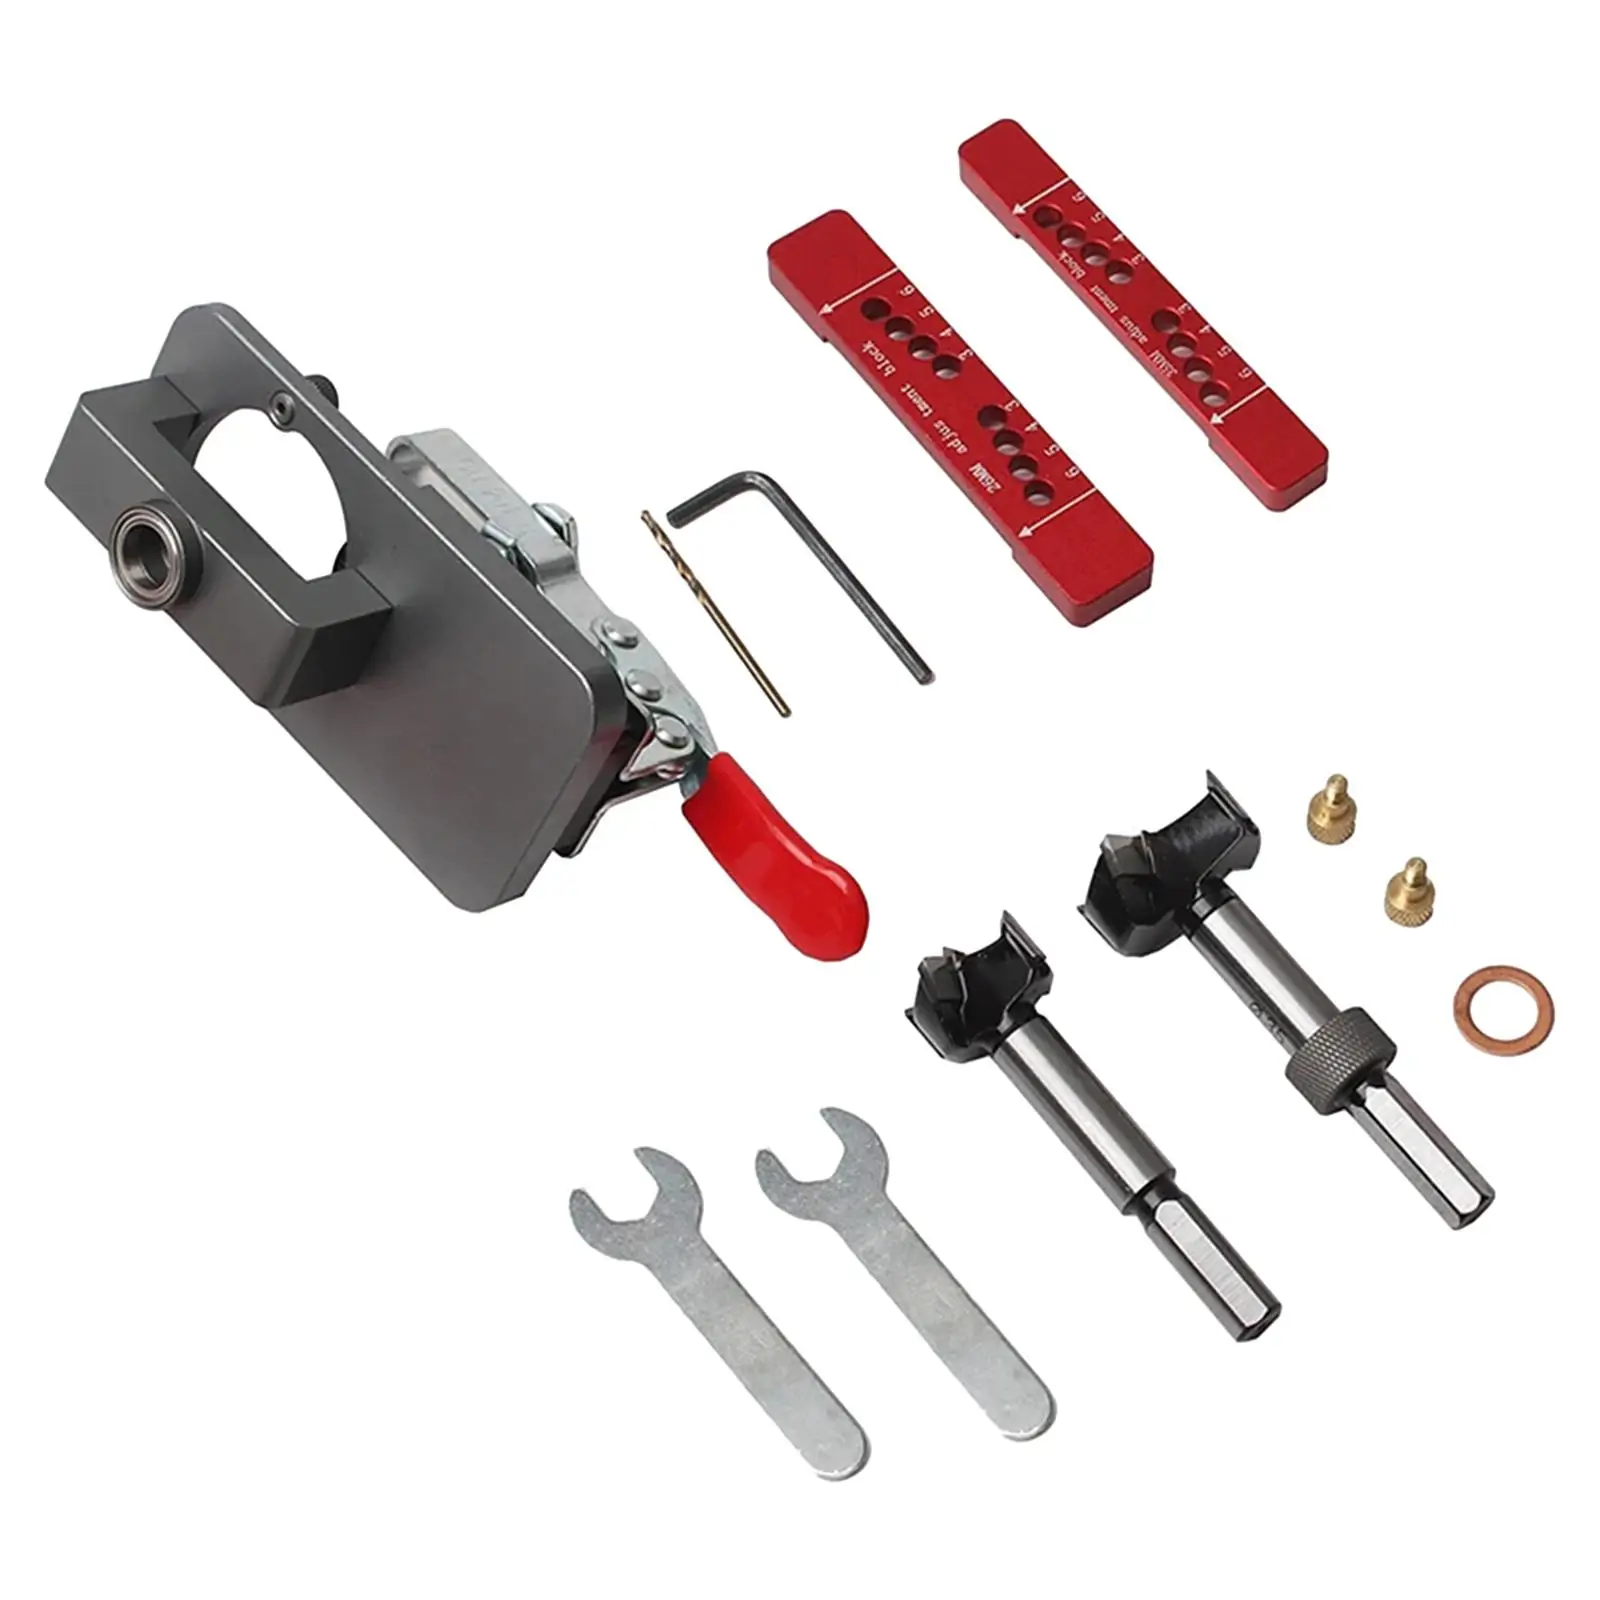 

35mm Concealed Hinge Jig Bit Wood Cutter DIY Tools Hole Punch Locator Kit Wood Puncher Locator for Cabinet Door Hinges Inset